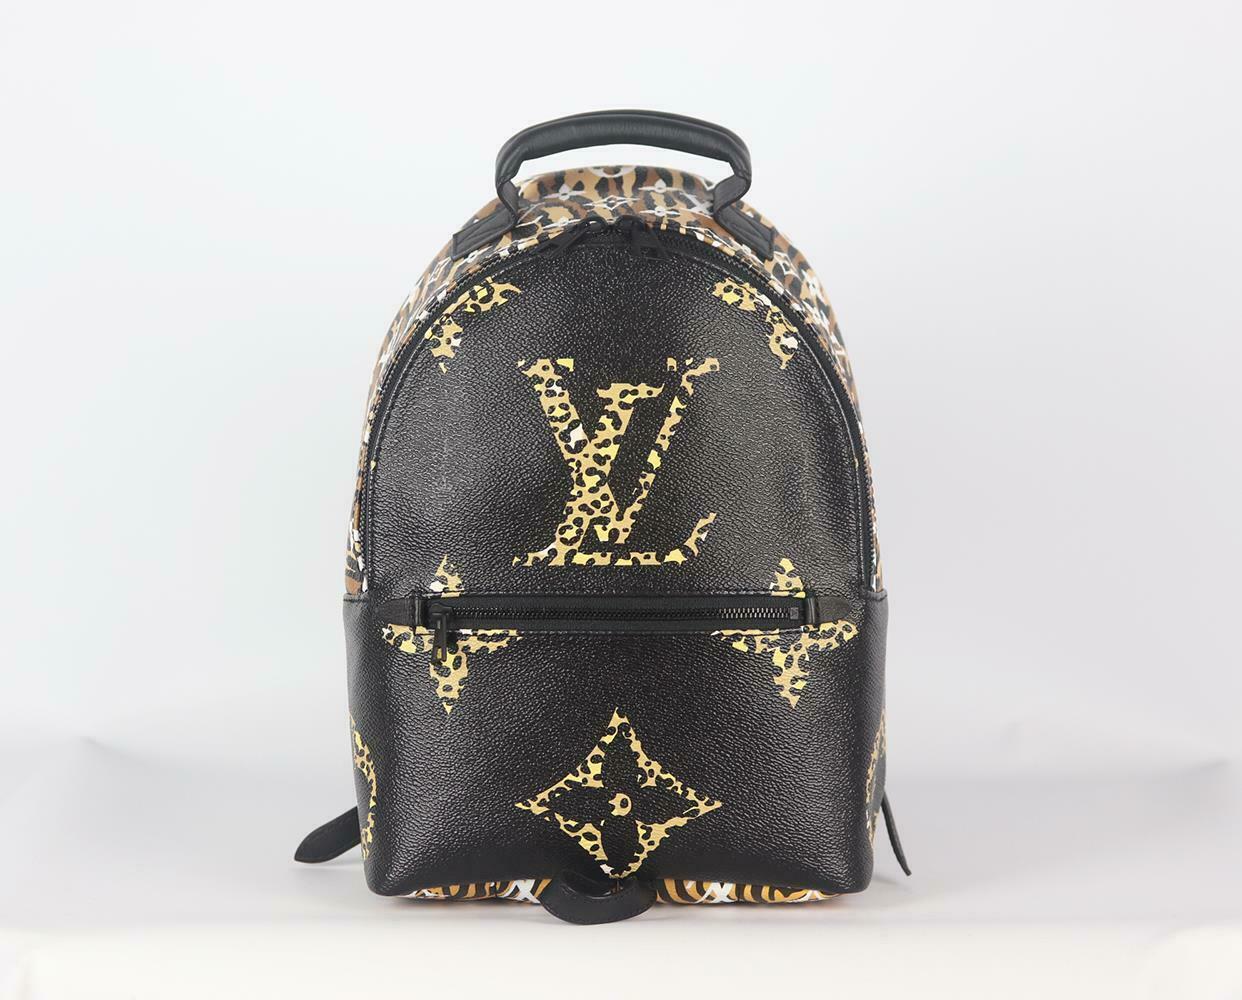 The Louis Vuitton Palm Springs Jungle Giant Monogram emblem is still one of the industry's most enduring logos, this backpack has been made in France from rich leopard-print coated canvas and has durable leather trims, including black hardware and